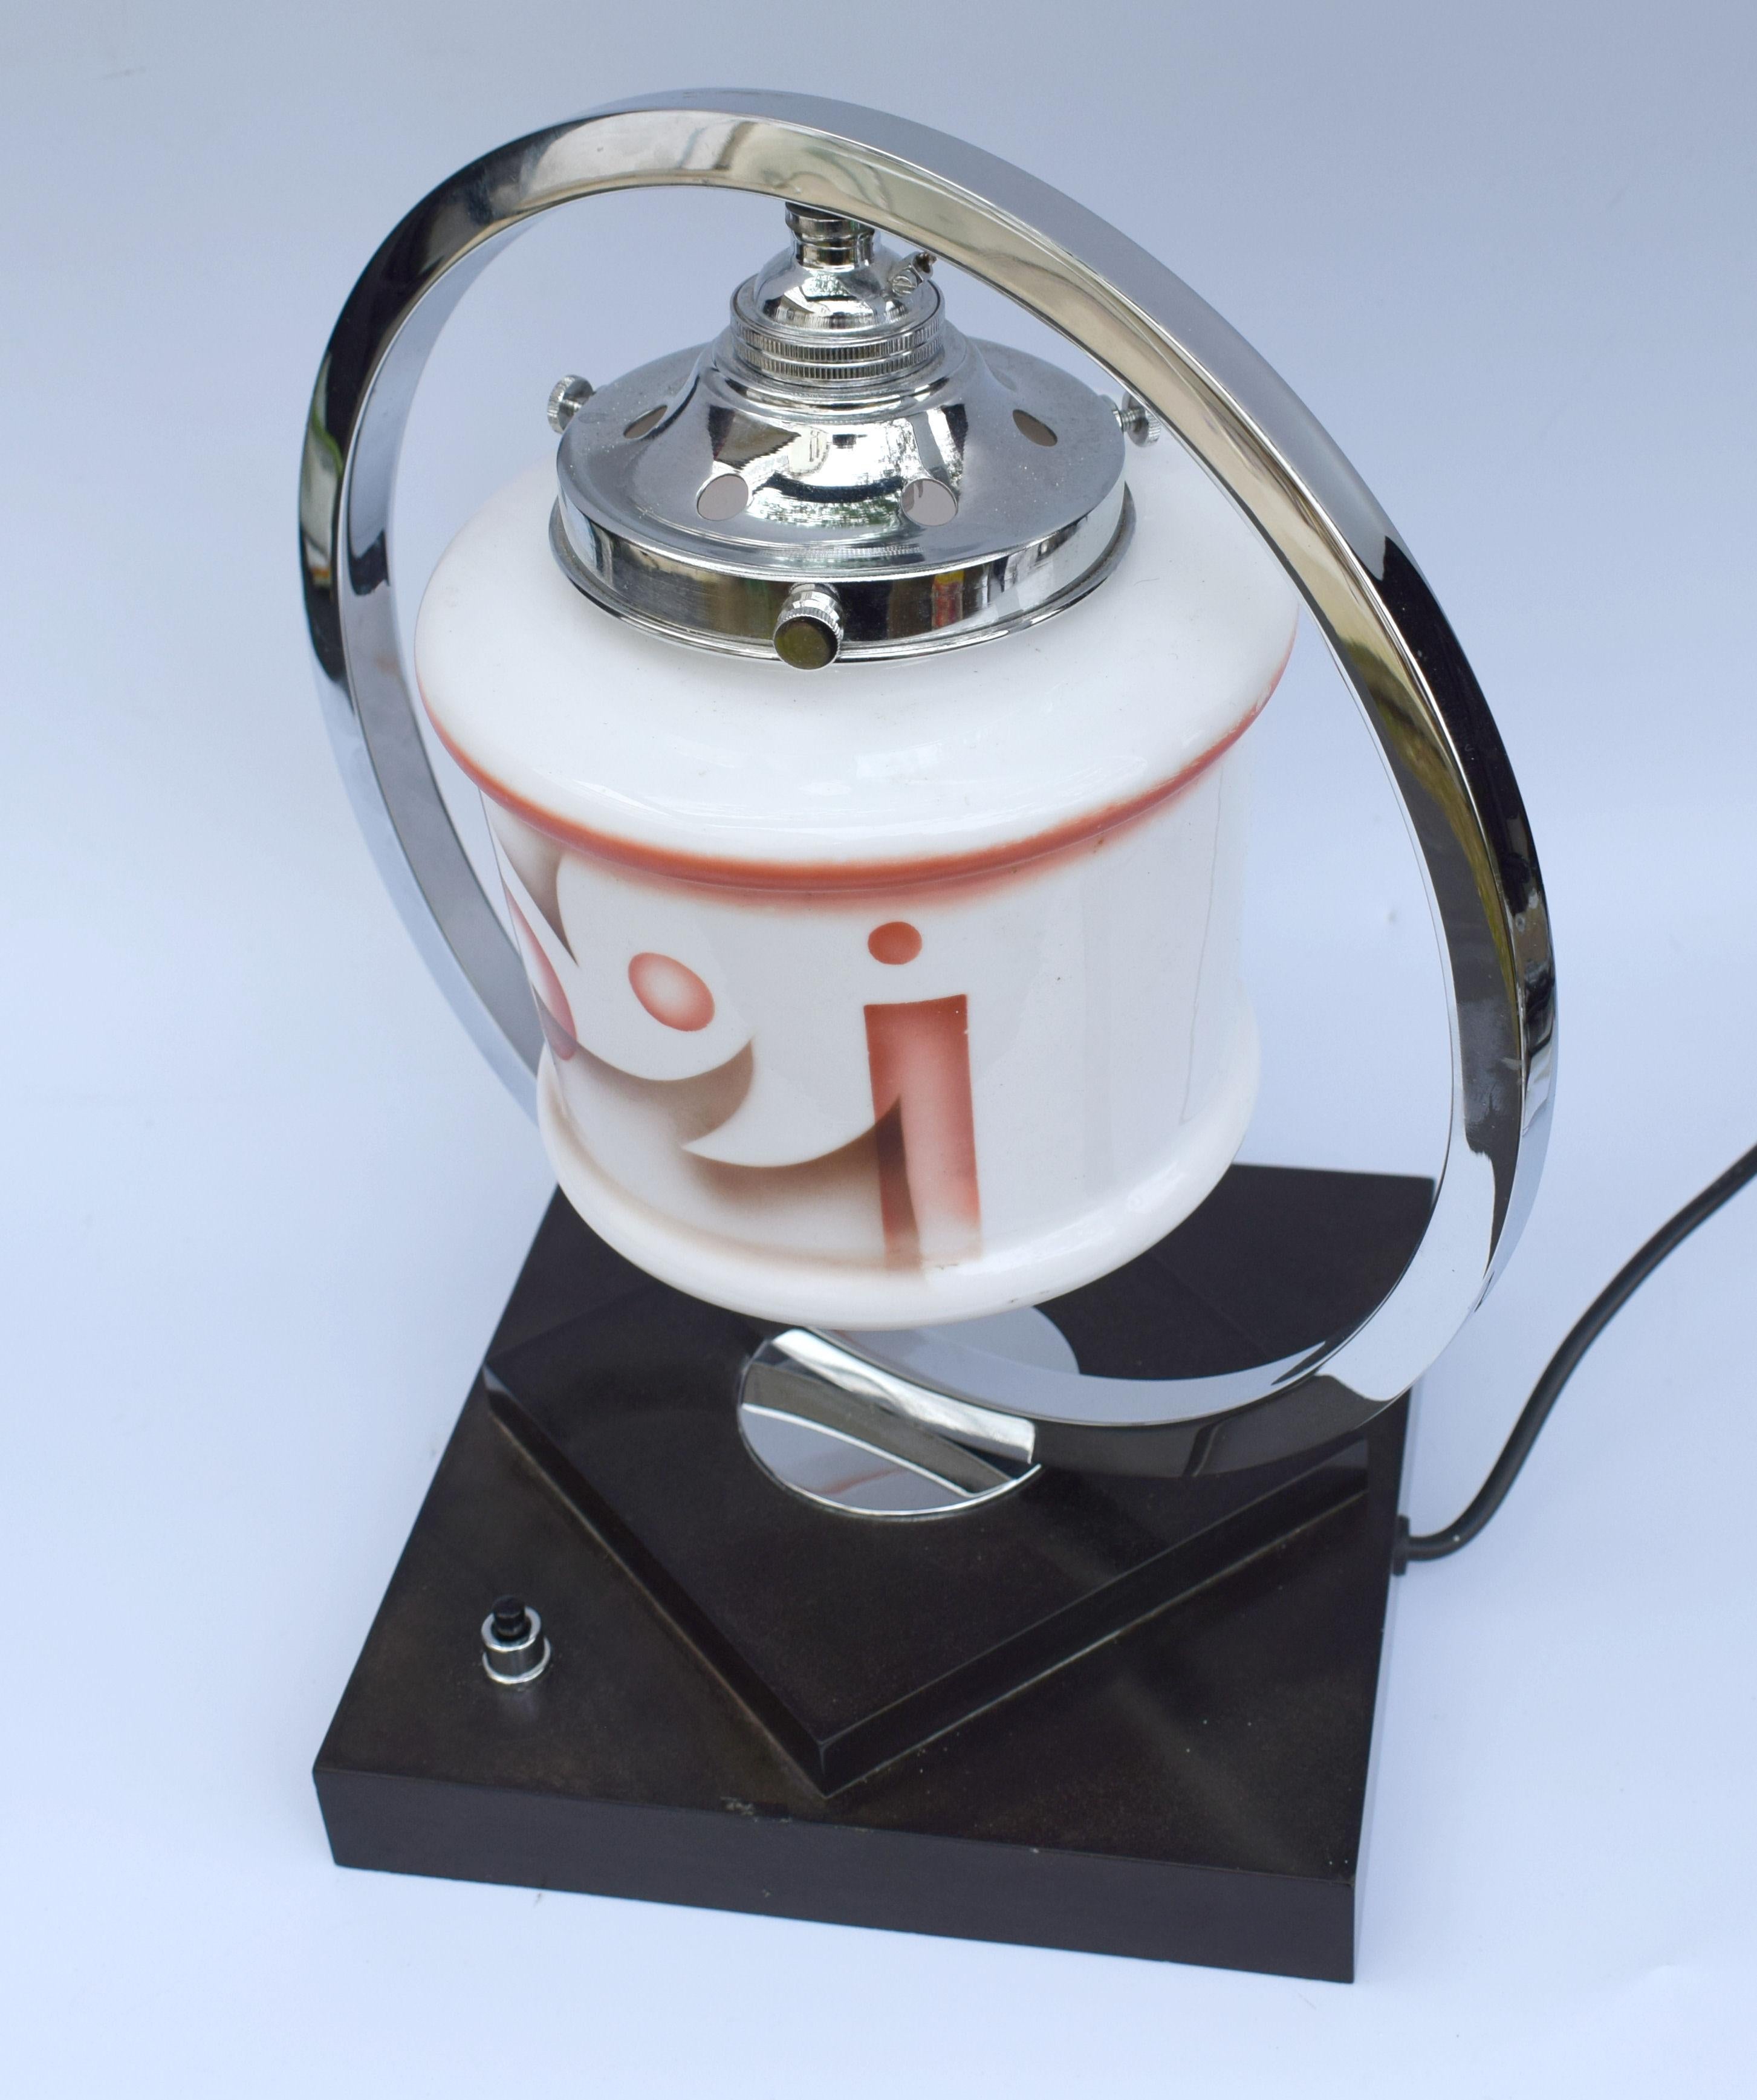 Art Deco Bakelite and Chrome Table Lamp, circa 1930 In Good Condition For Sale In Devon, England